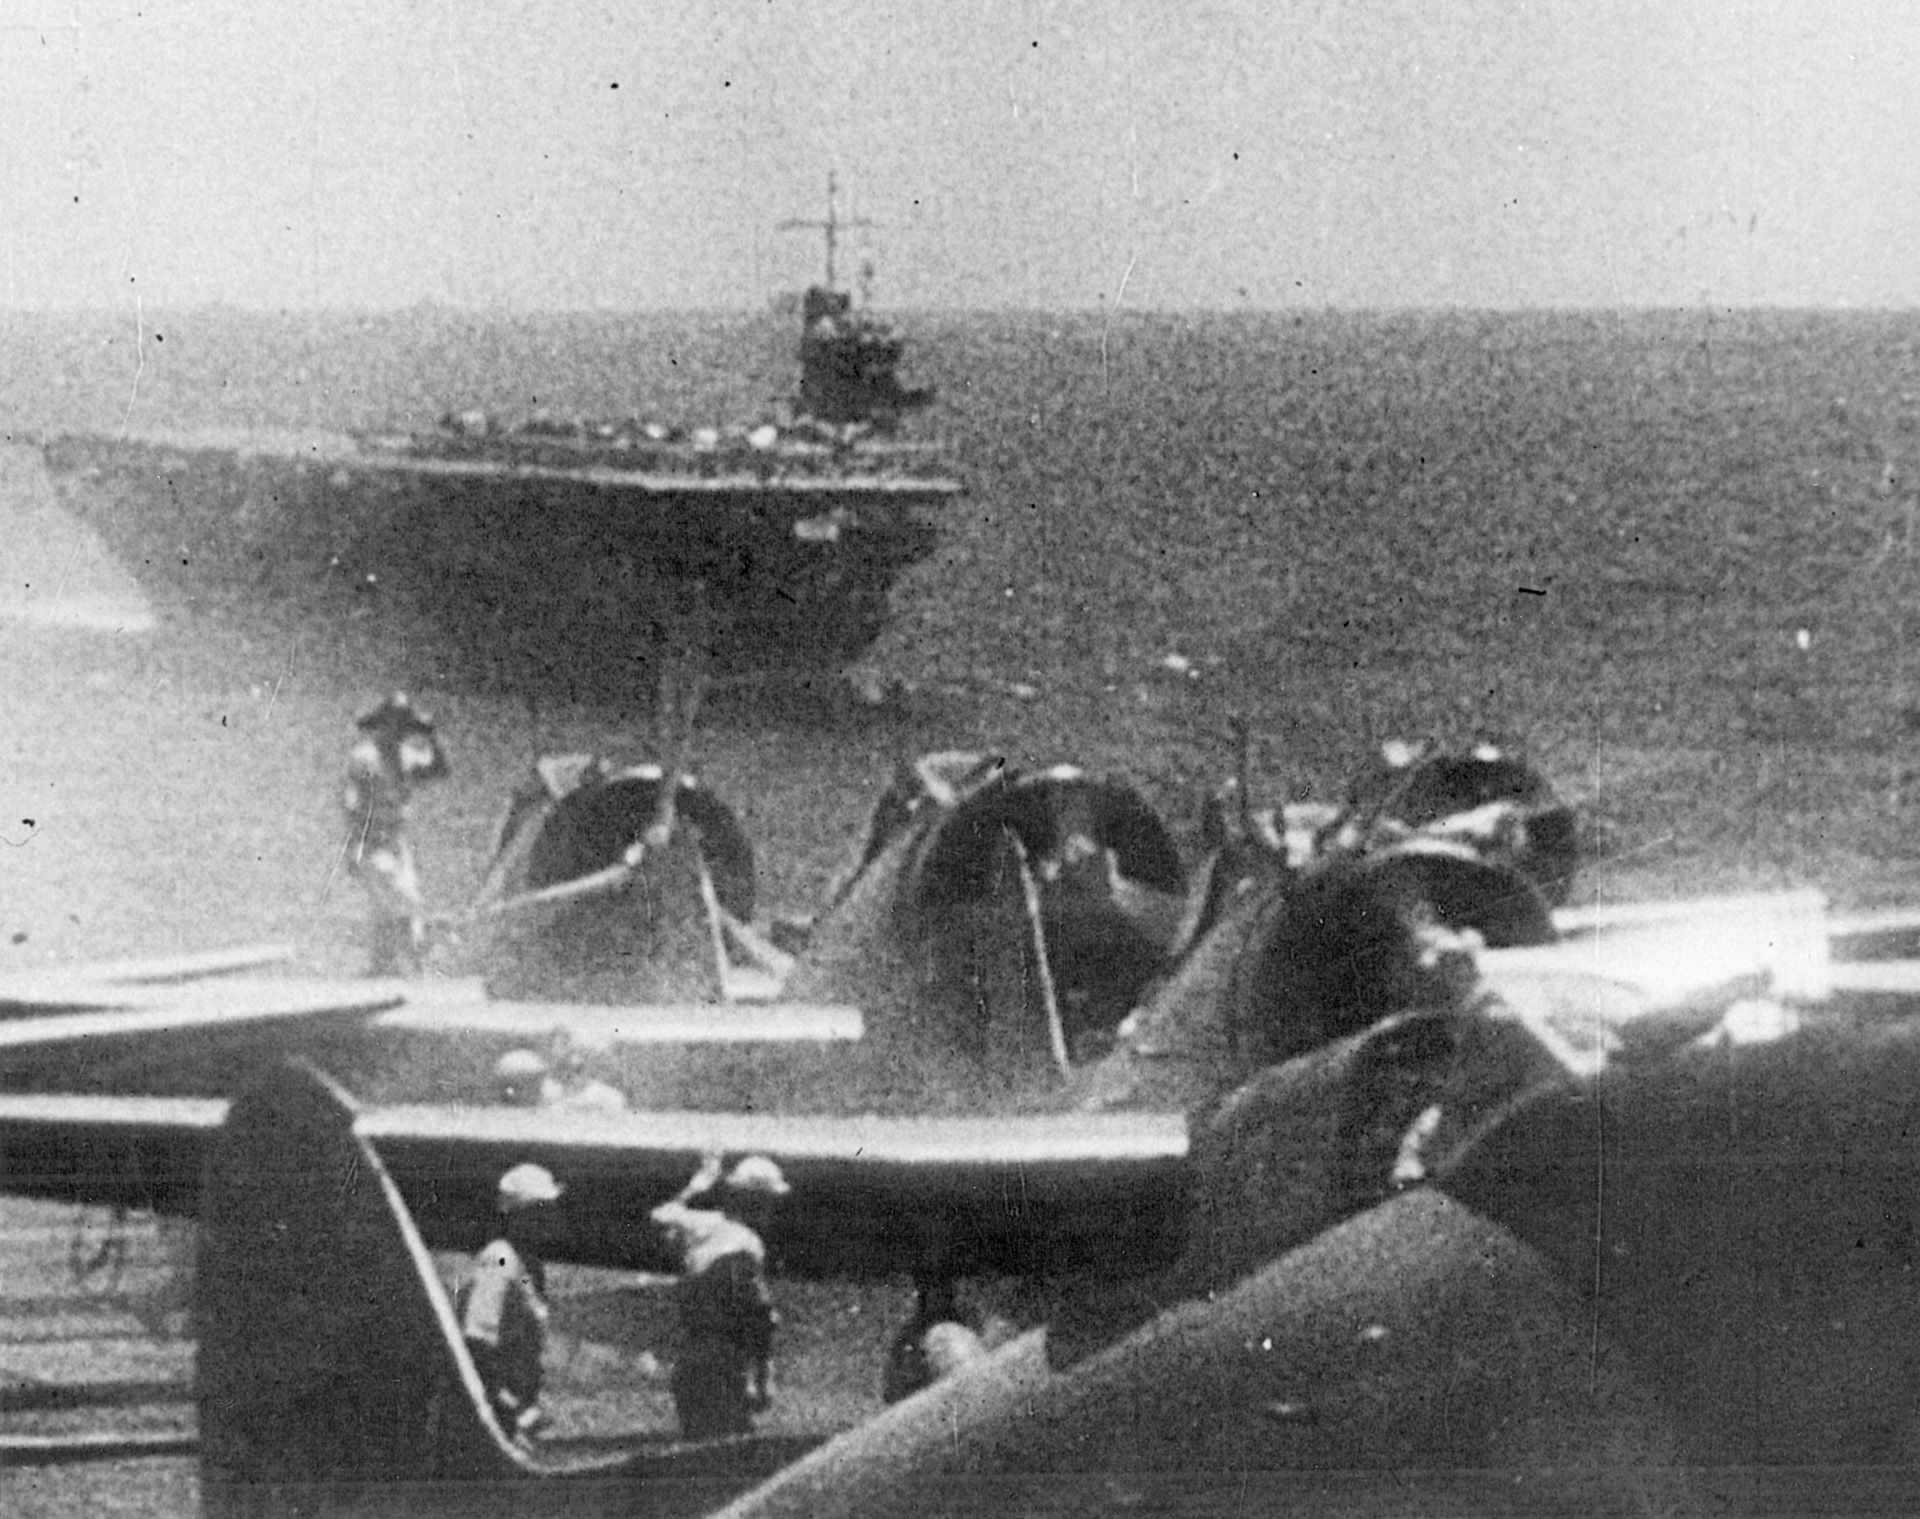 Crewmen tend to aircraft aboard a Japanese carrier, while a sister flattop plows ahead nearby.